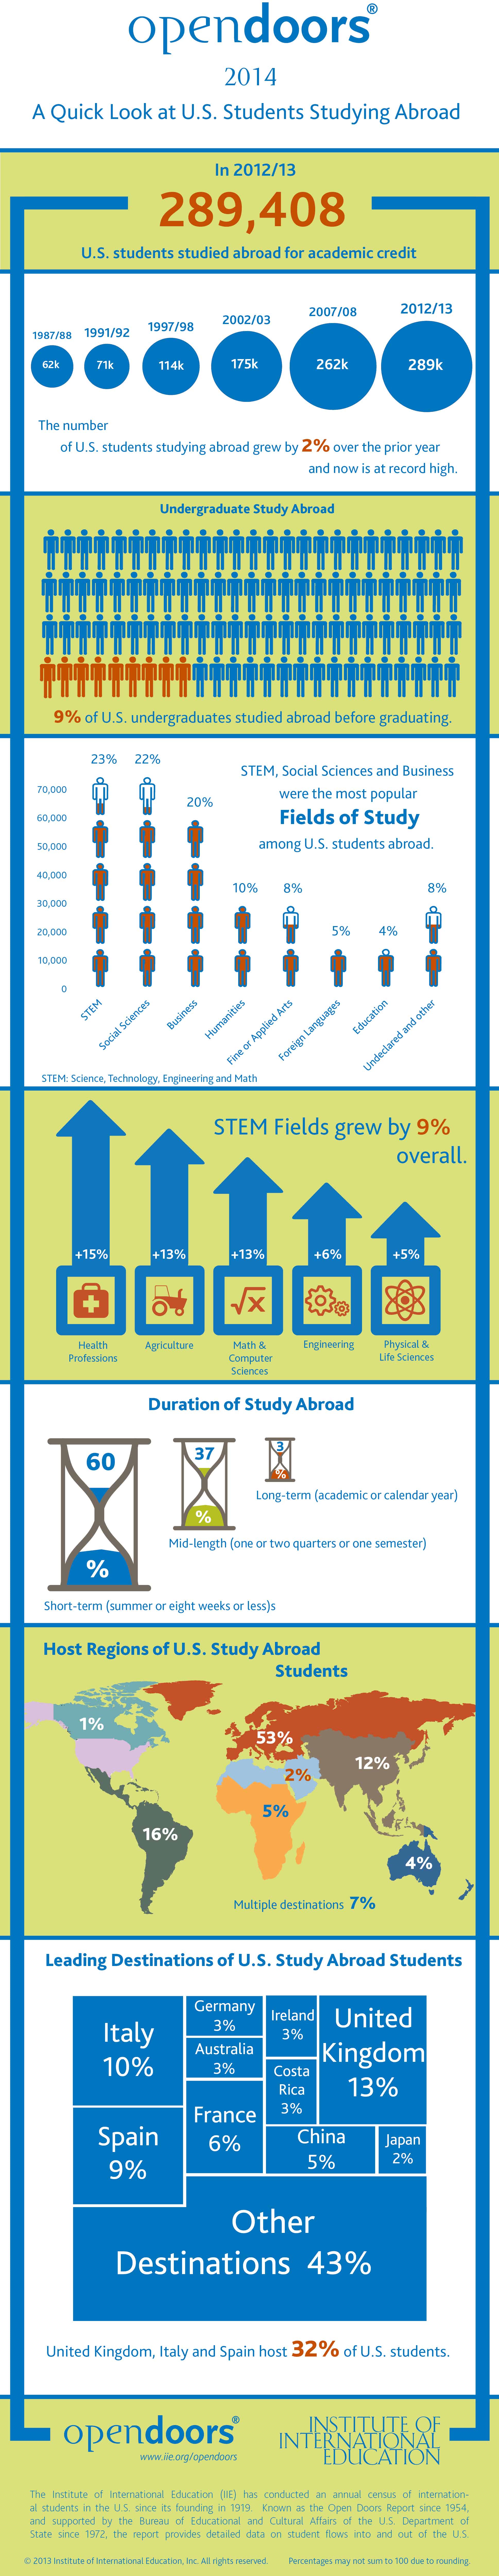 us-students-studying-abroad-infographic